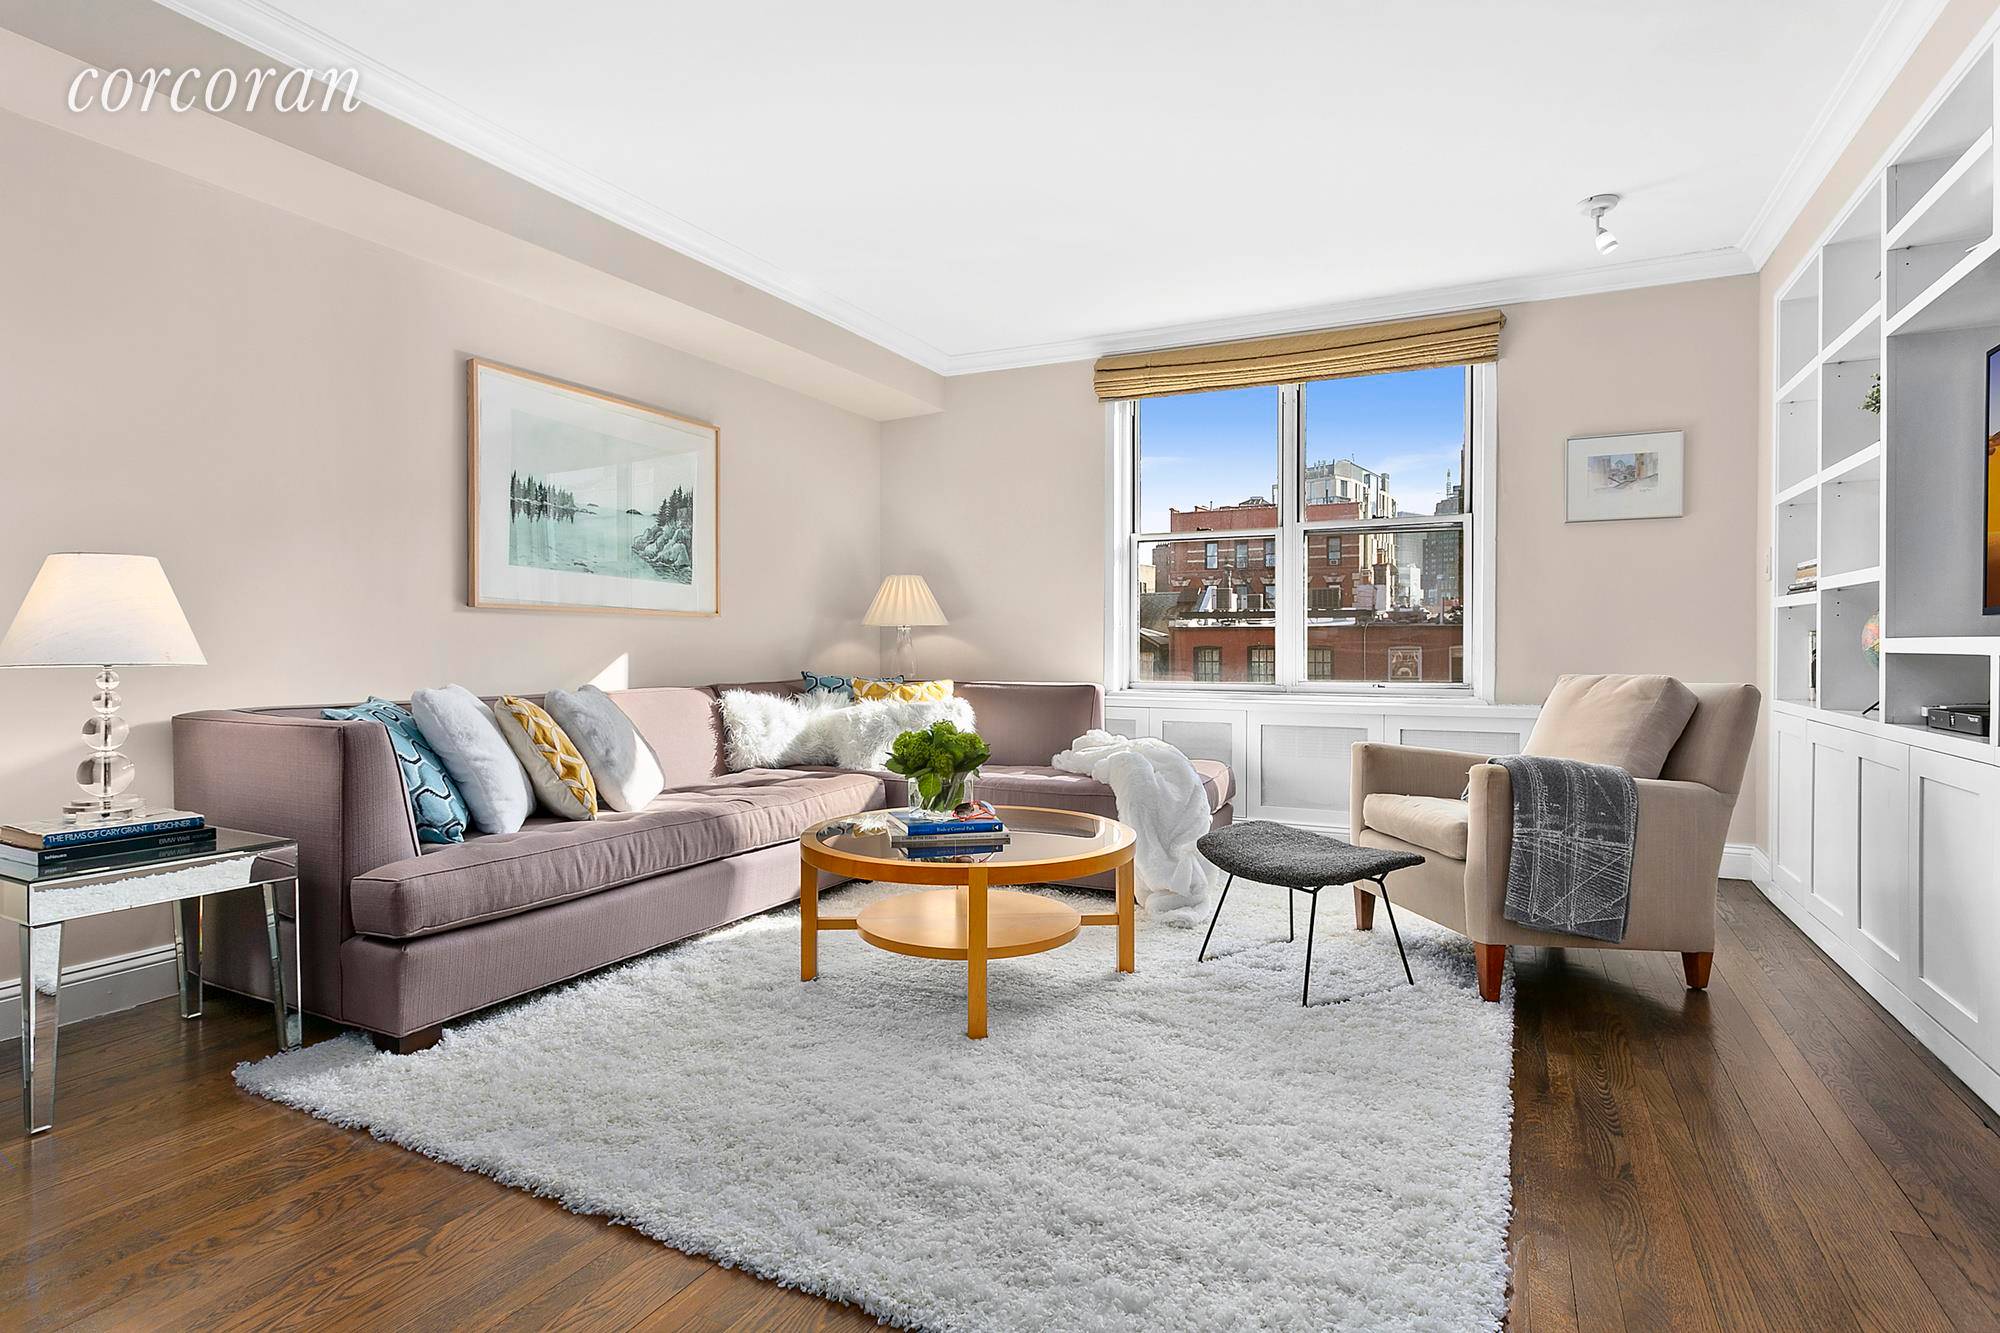 Exceptional sunlight and pin drop quiet, this well designed and largely proportioned split 2 bedroom, 2 bath home is perfectly situated at the crossroads of SoHo, the West Village and ...